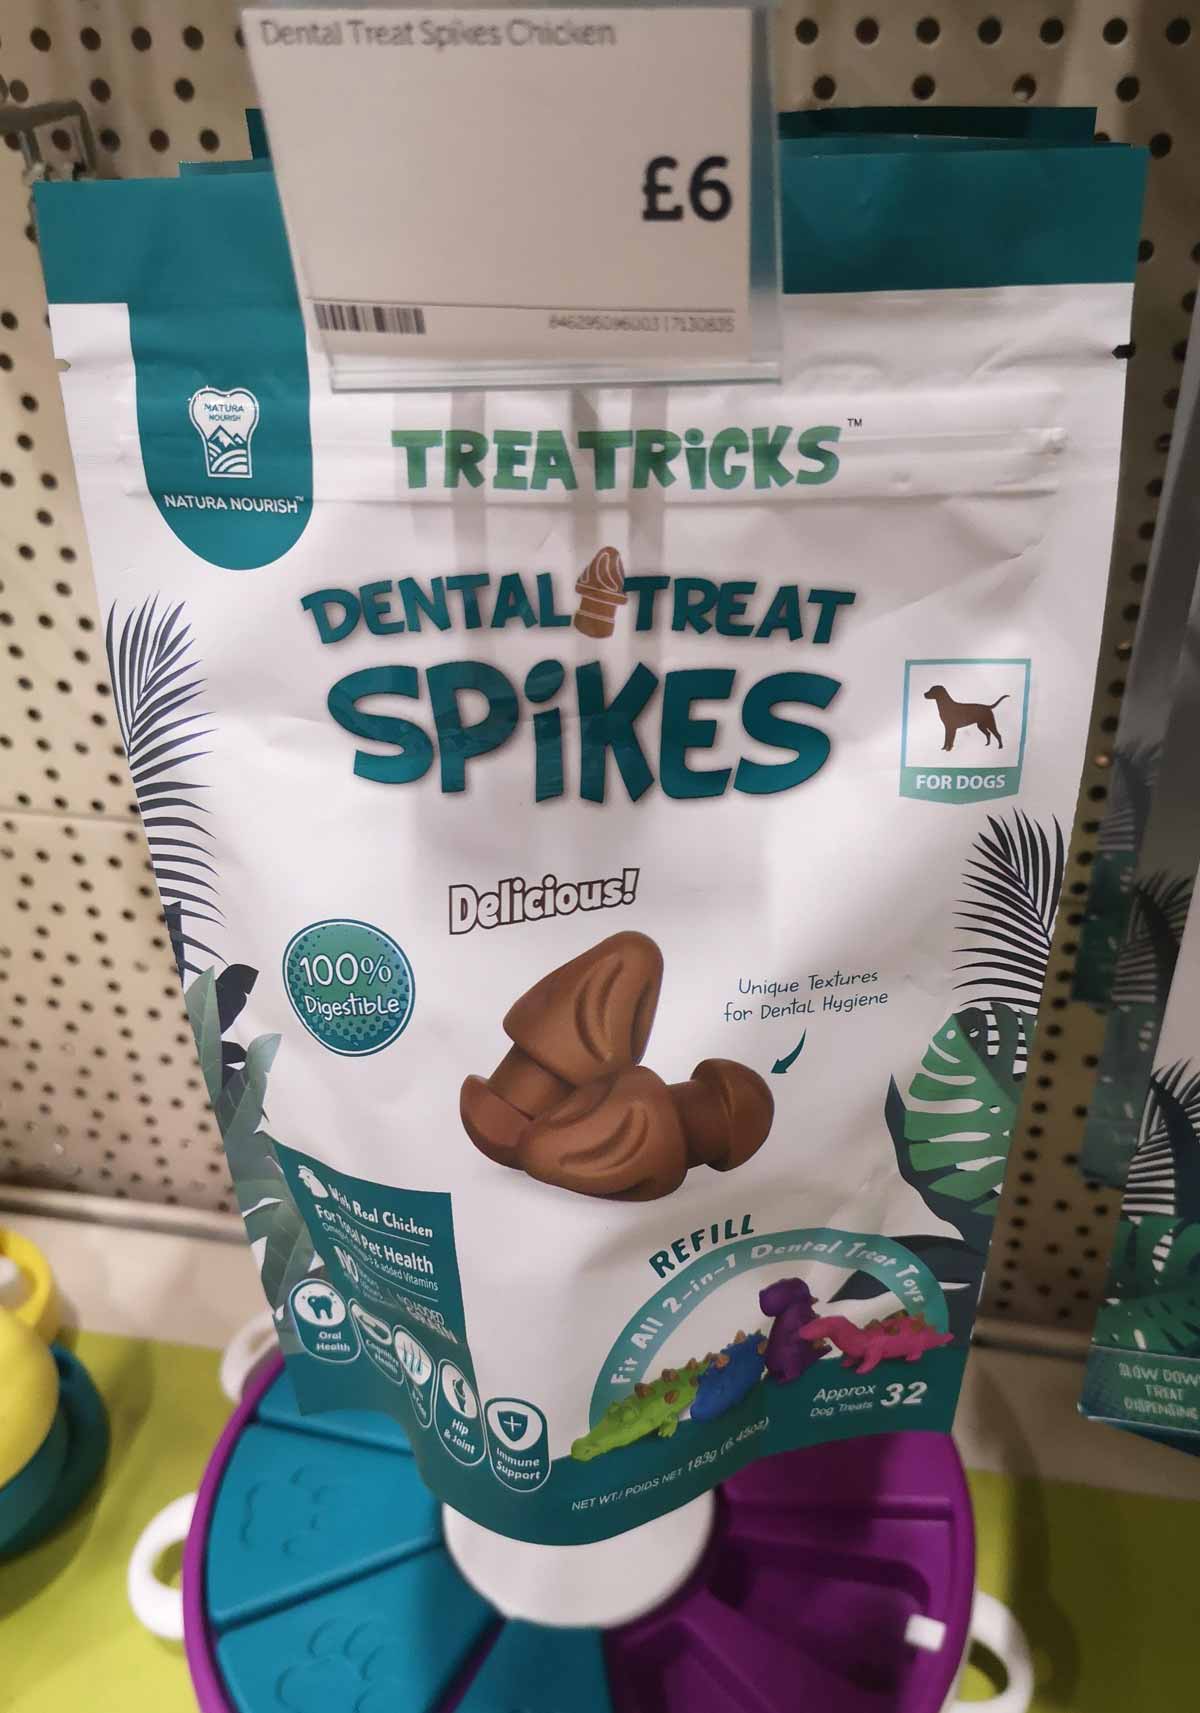 Some questionable dog treats at my work